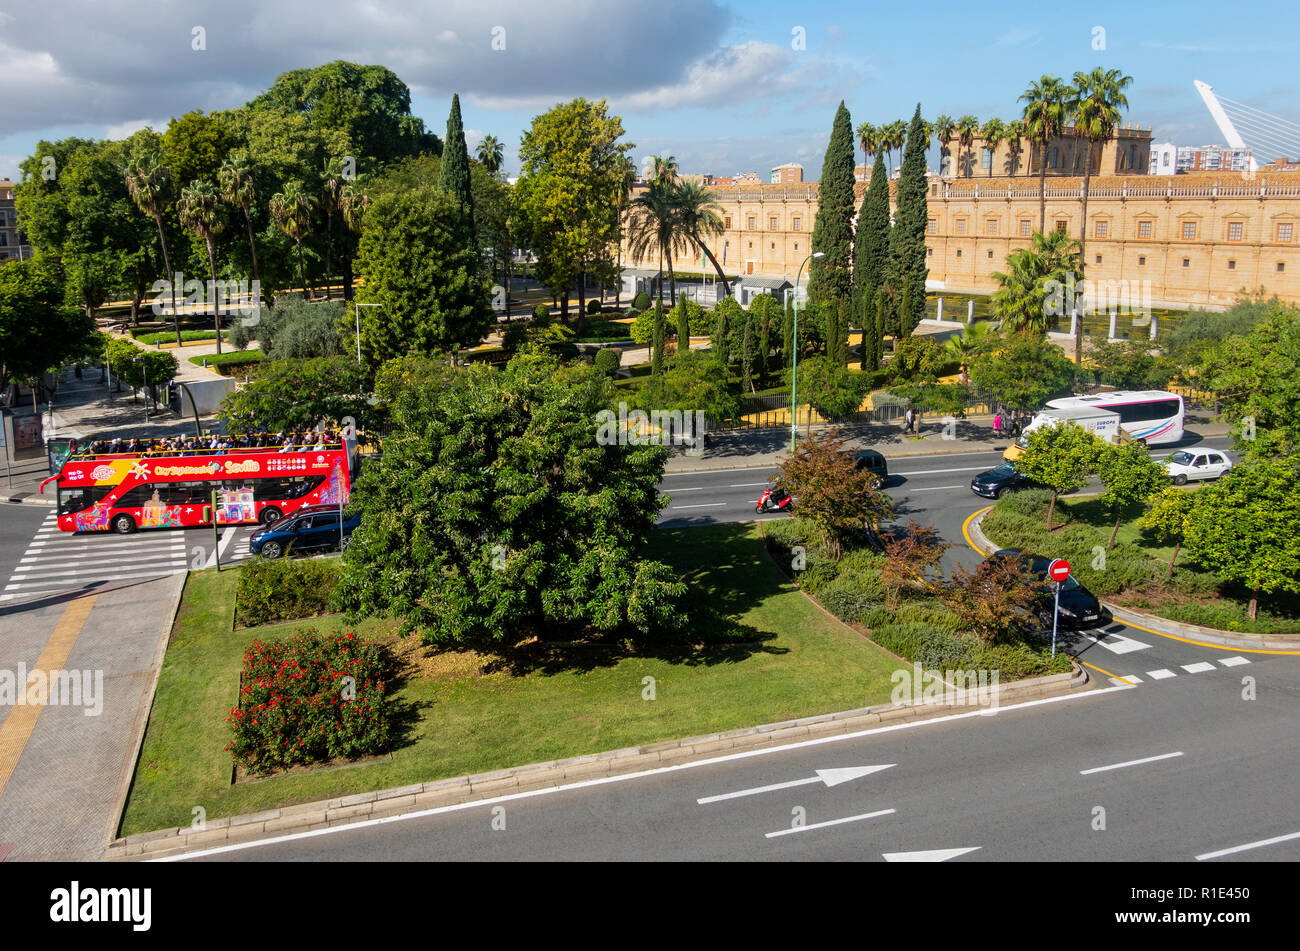 Bright red open top site-seeing bus passing a park in Seville, Spain Stock Photo